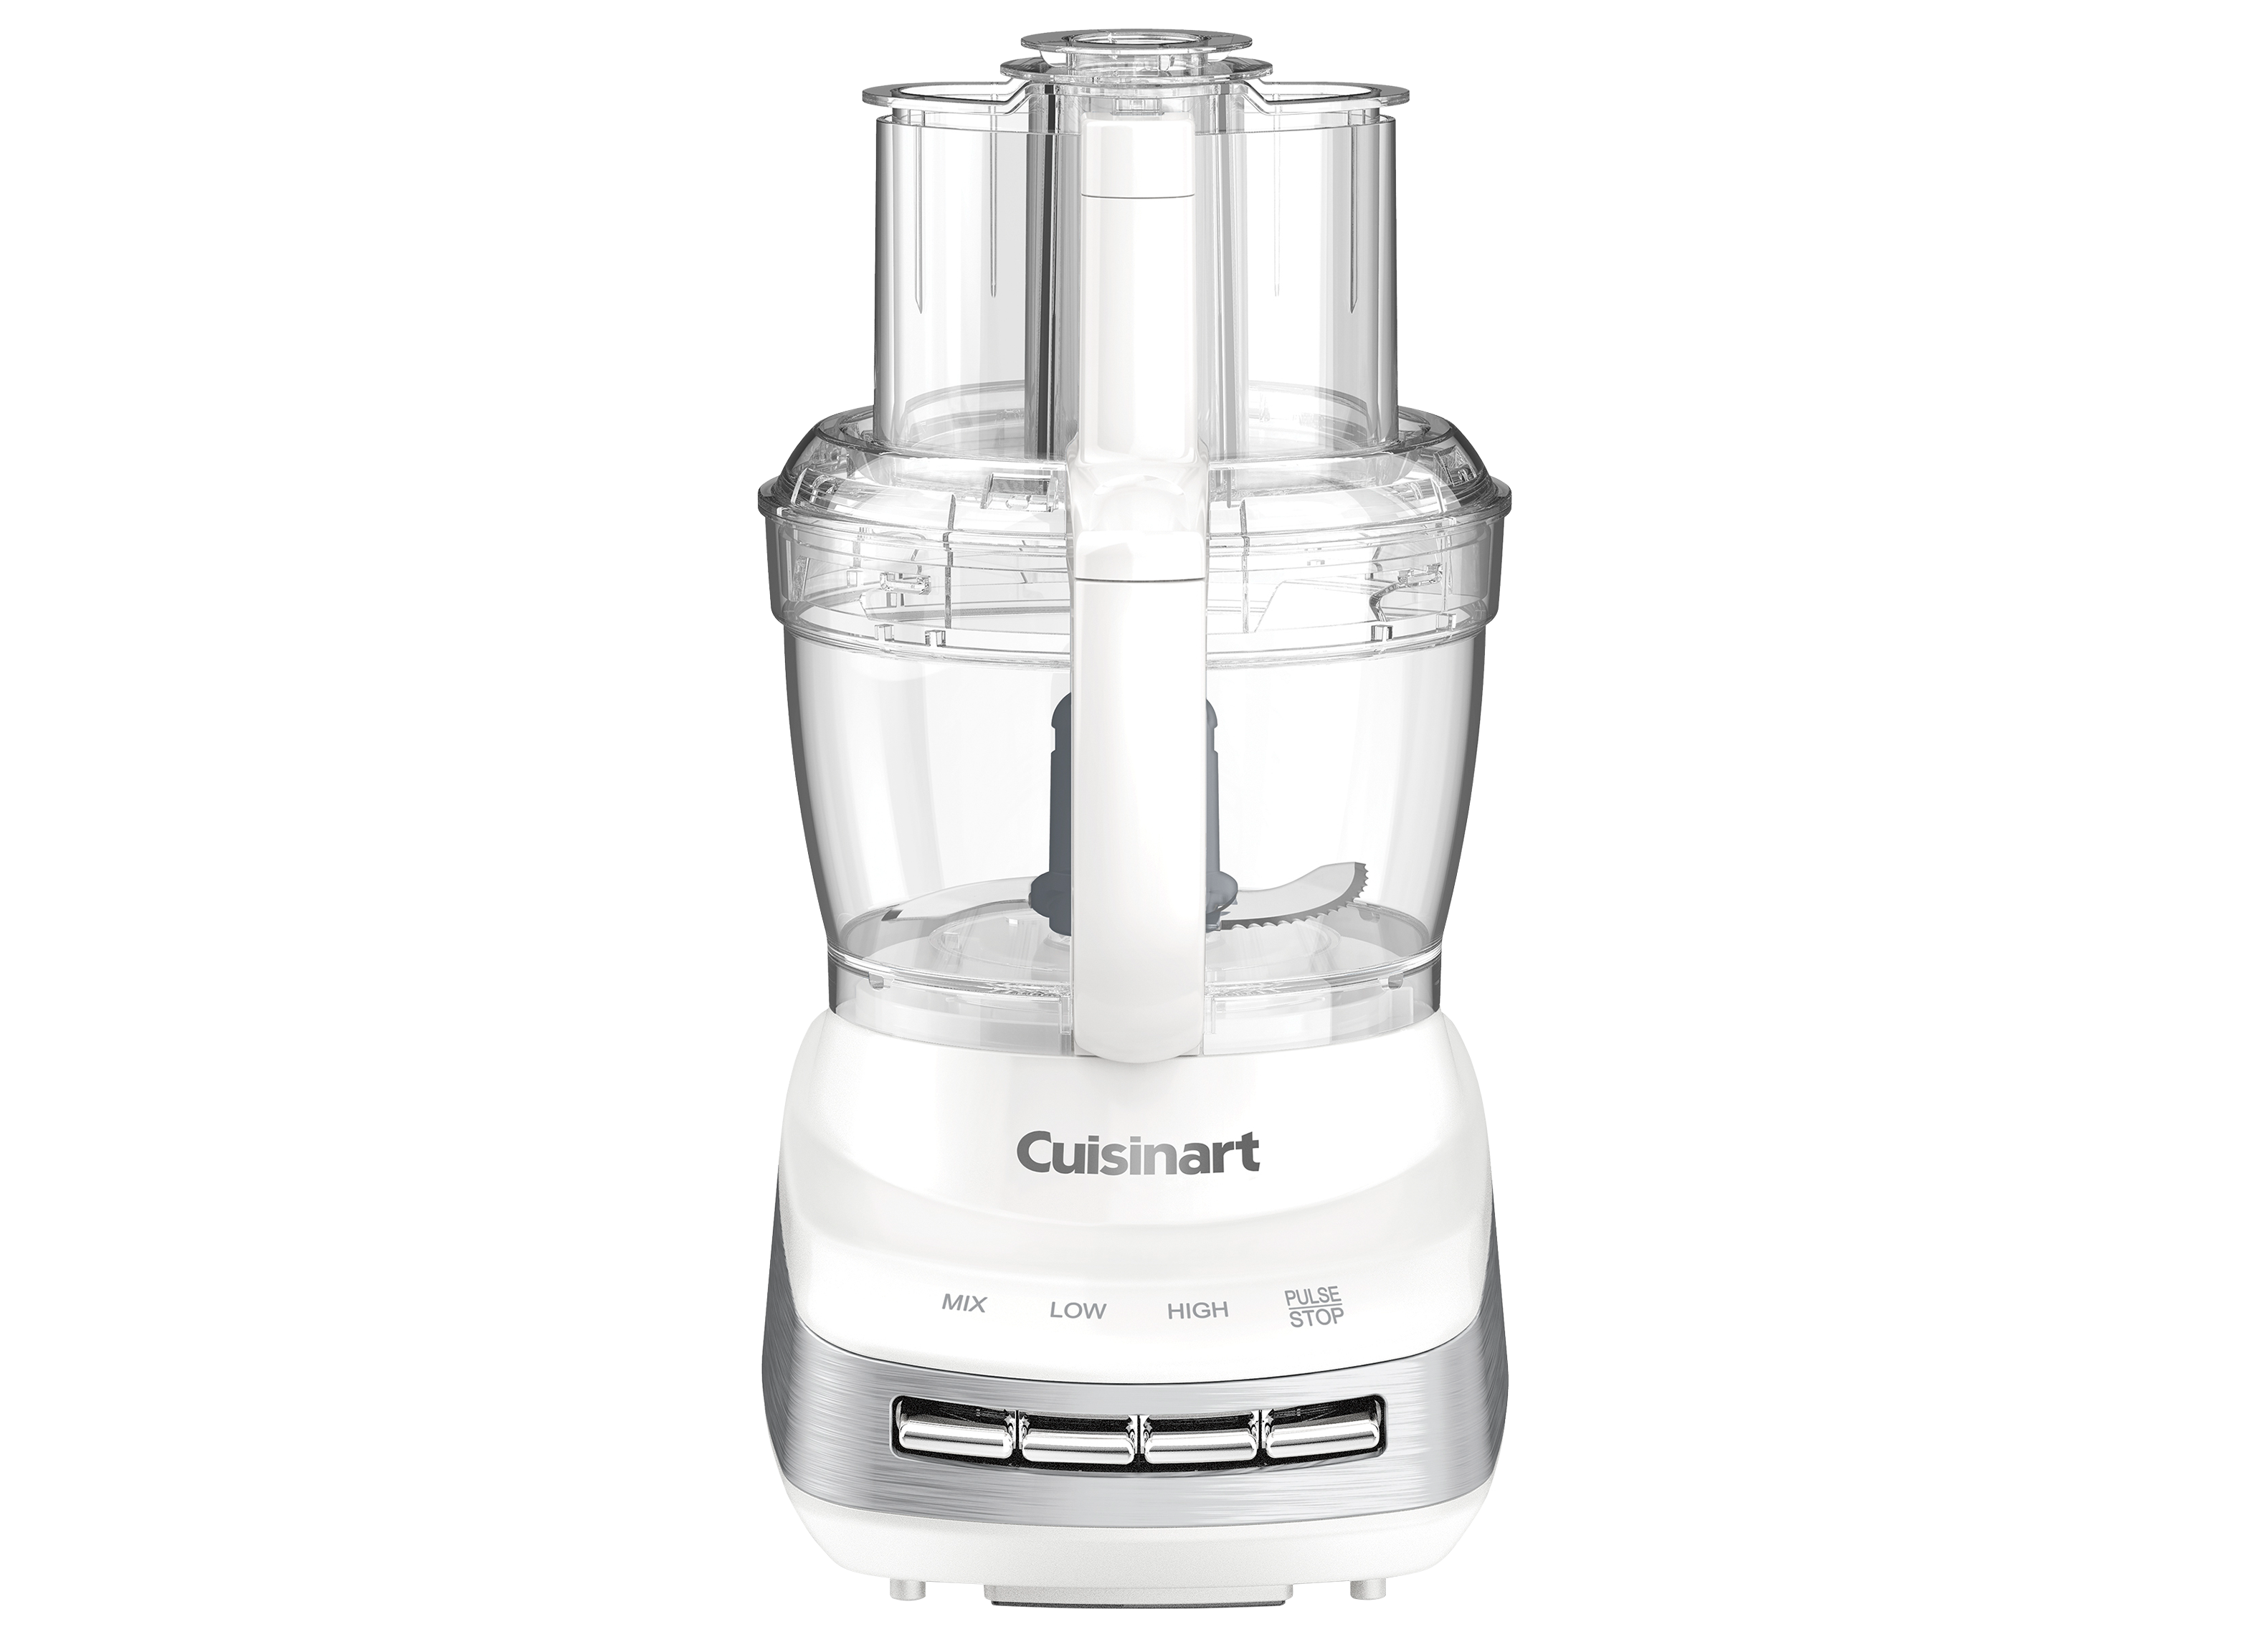 https://crdms.images.consumerreports.org/prod/products/cr/models/406337-food-processors-cuisinart-core-custom-fp-130-10029068.png